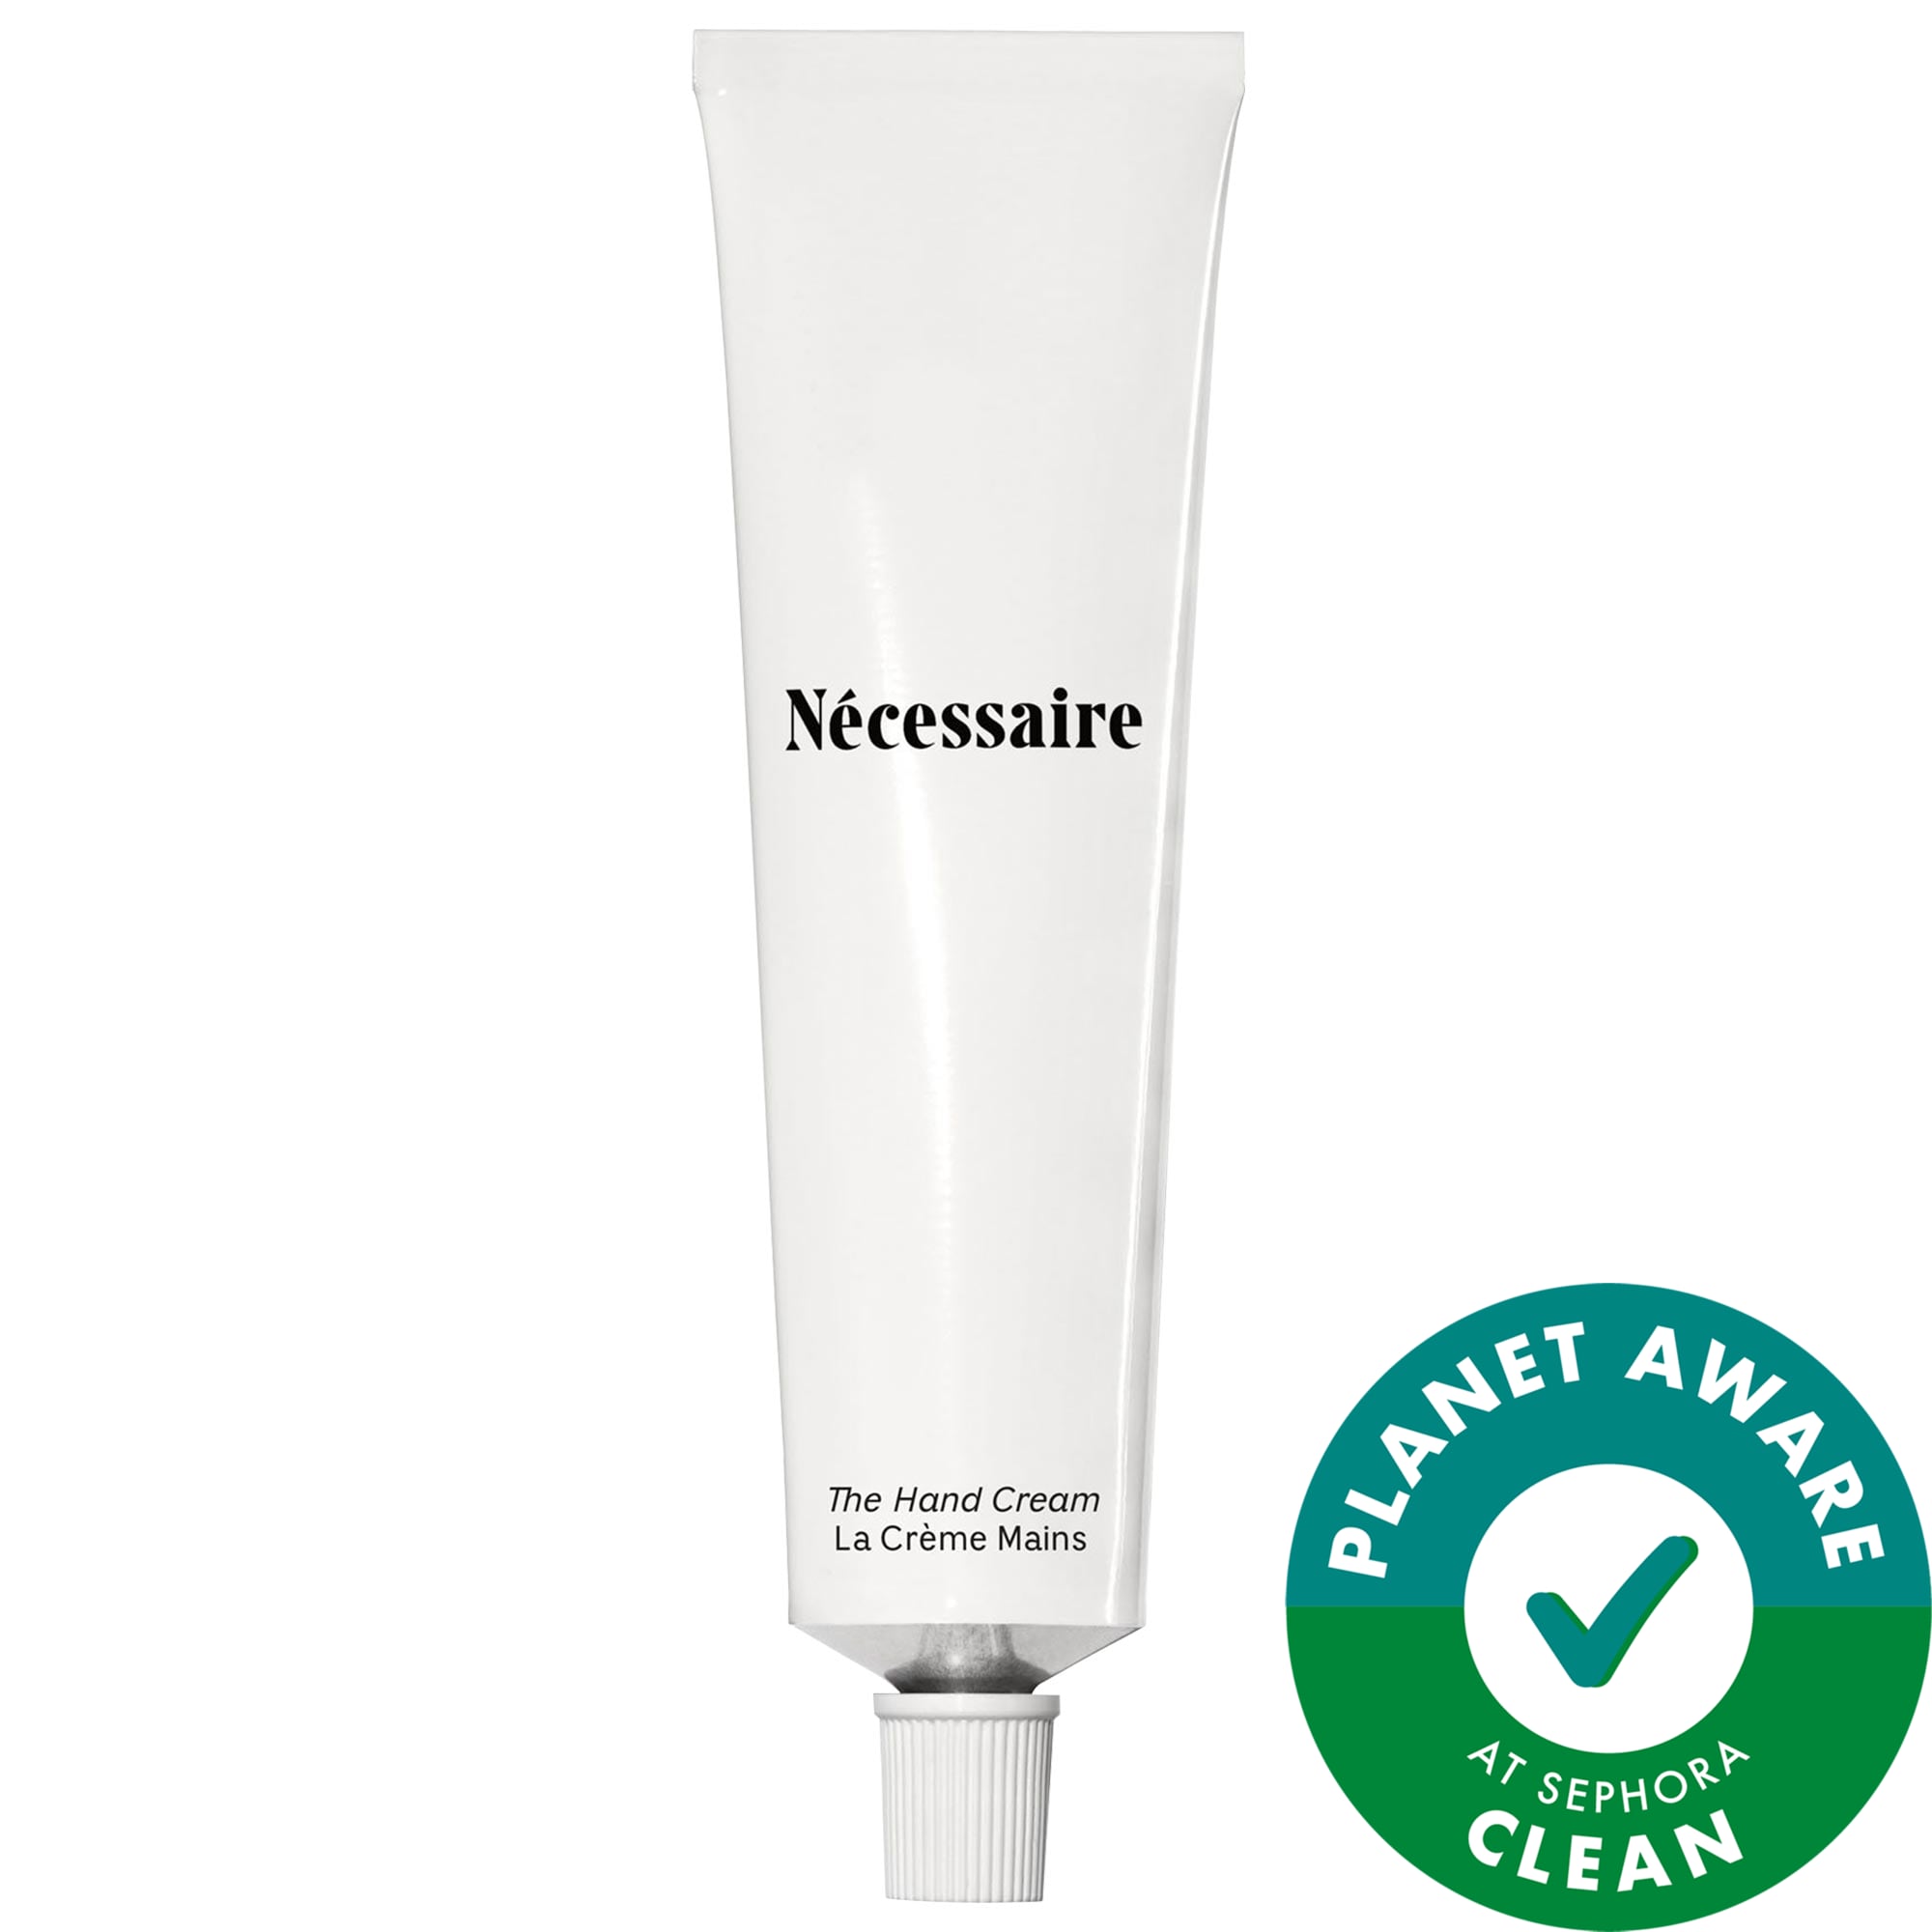 The Hand Cream - Barrier Treatment with 5 Ceramides, 5 Peptides + Niacinamide Nécessaire